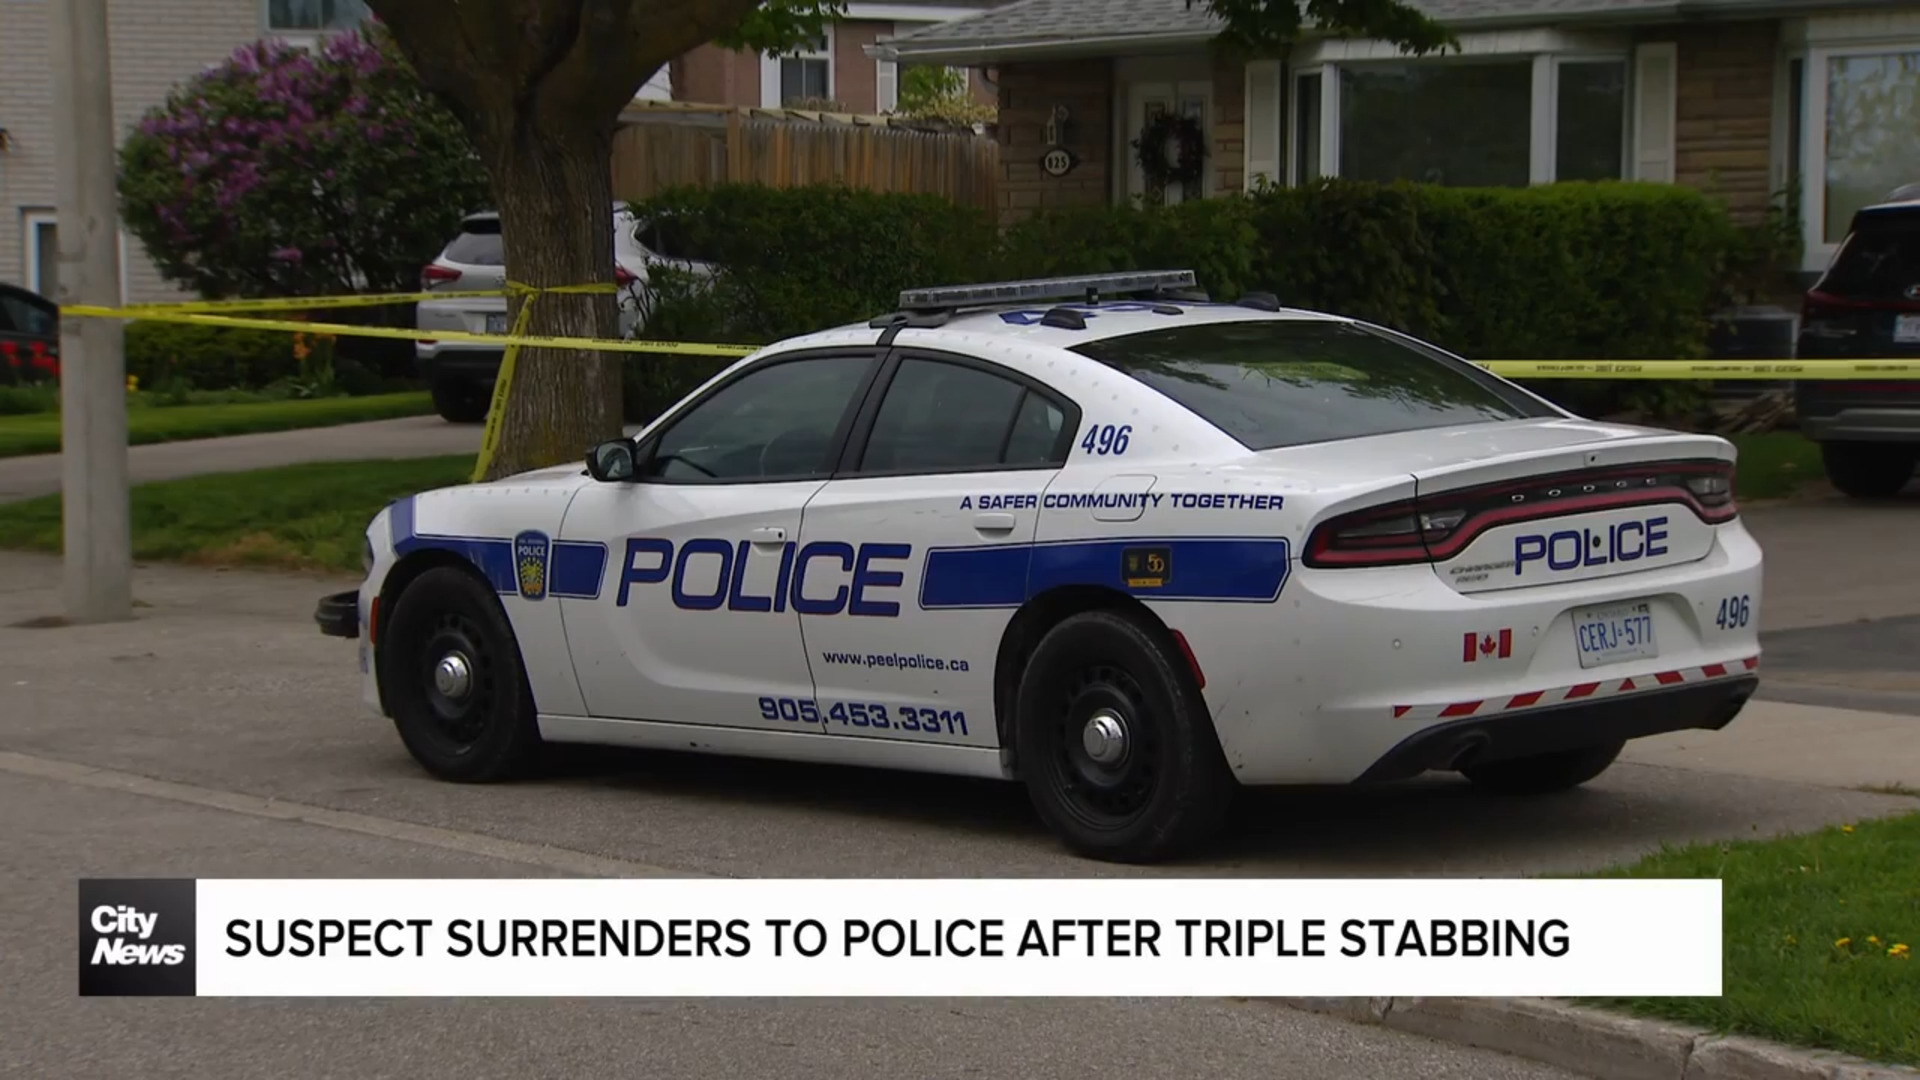 Suspect surrenders to police after triple stabbing in Mississauga